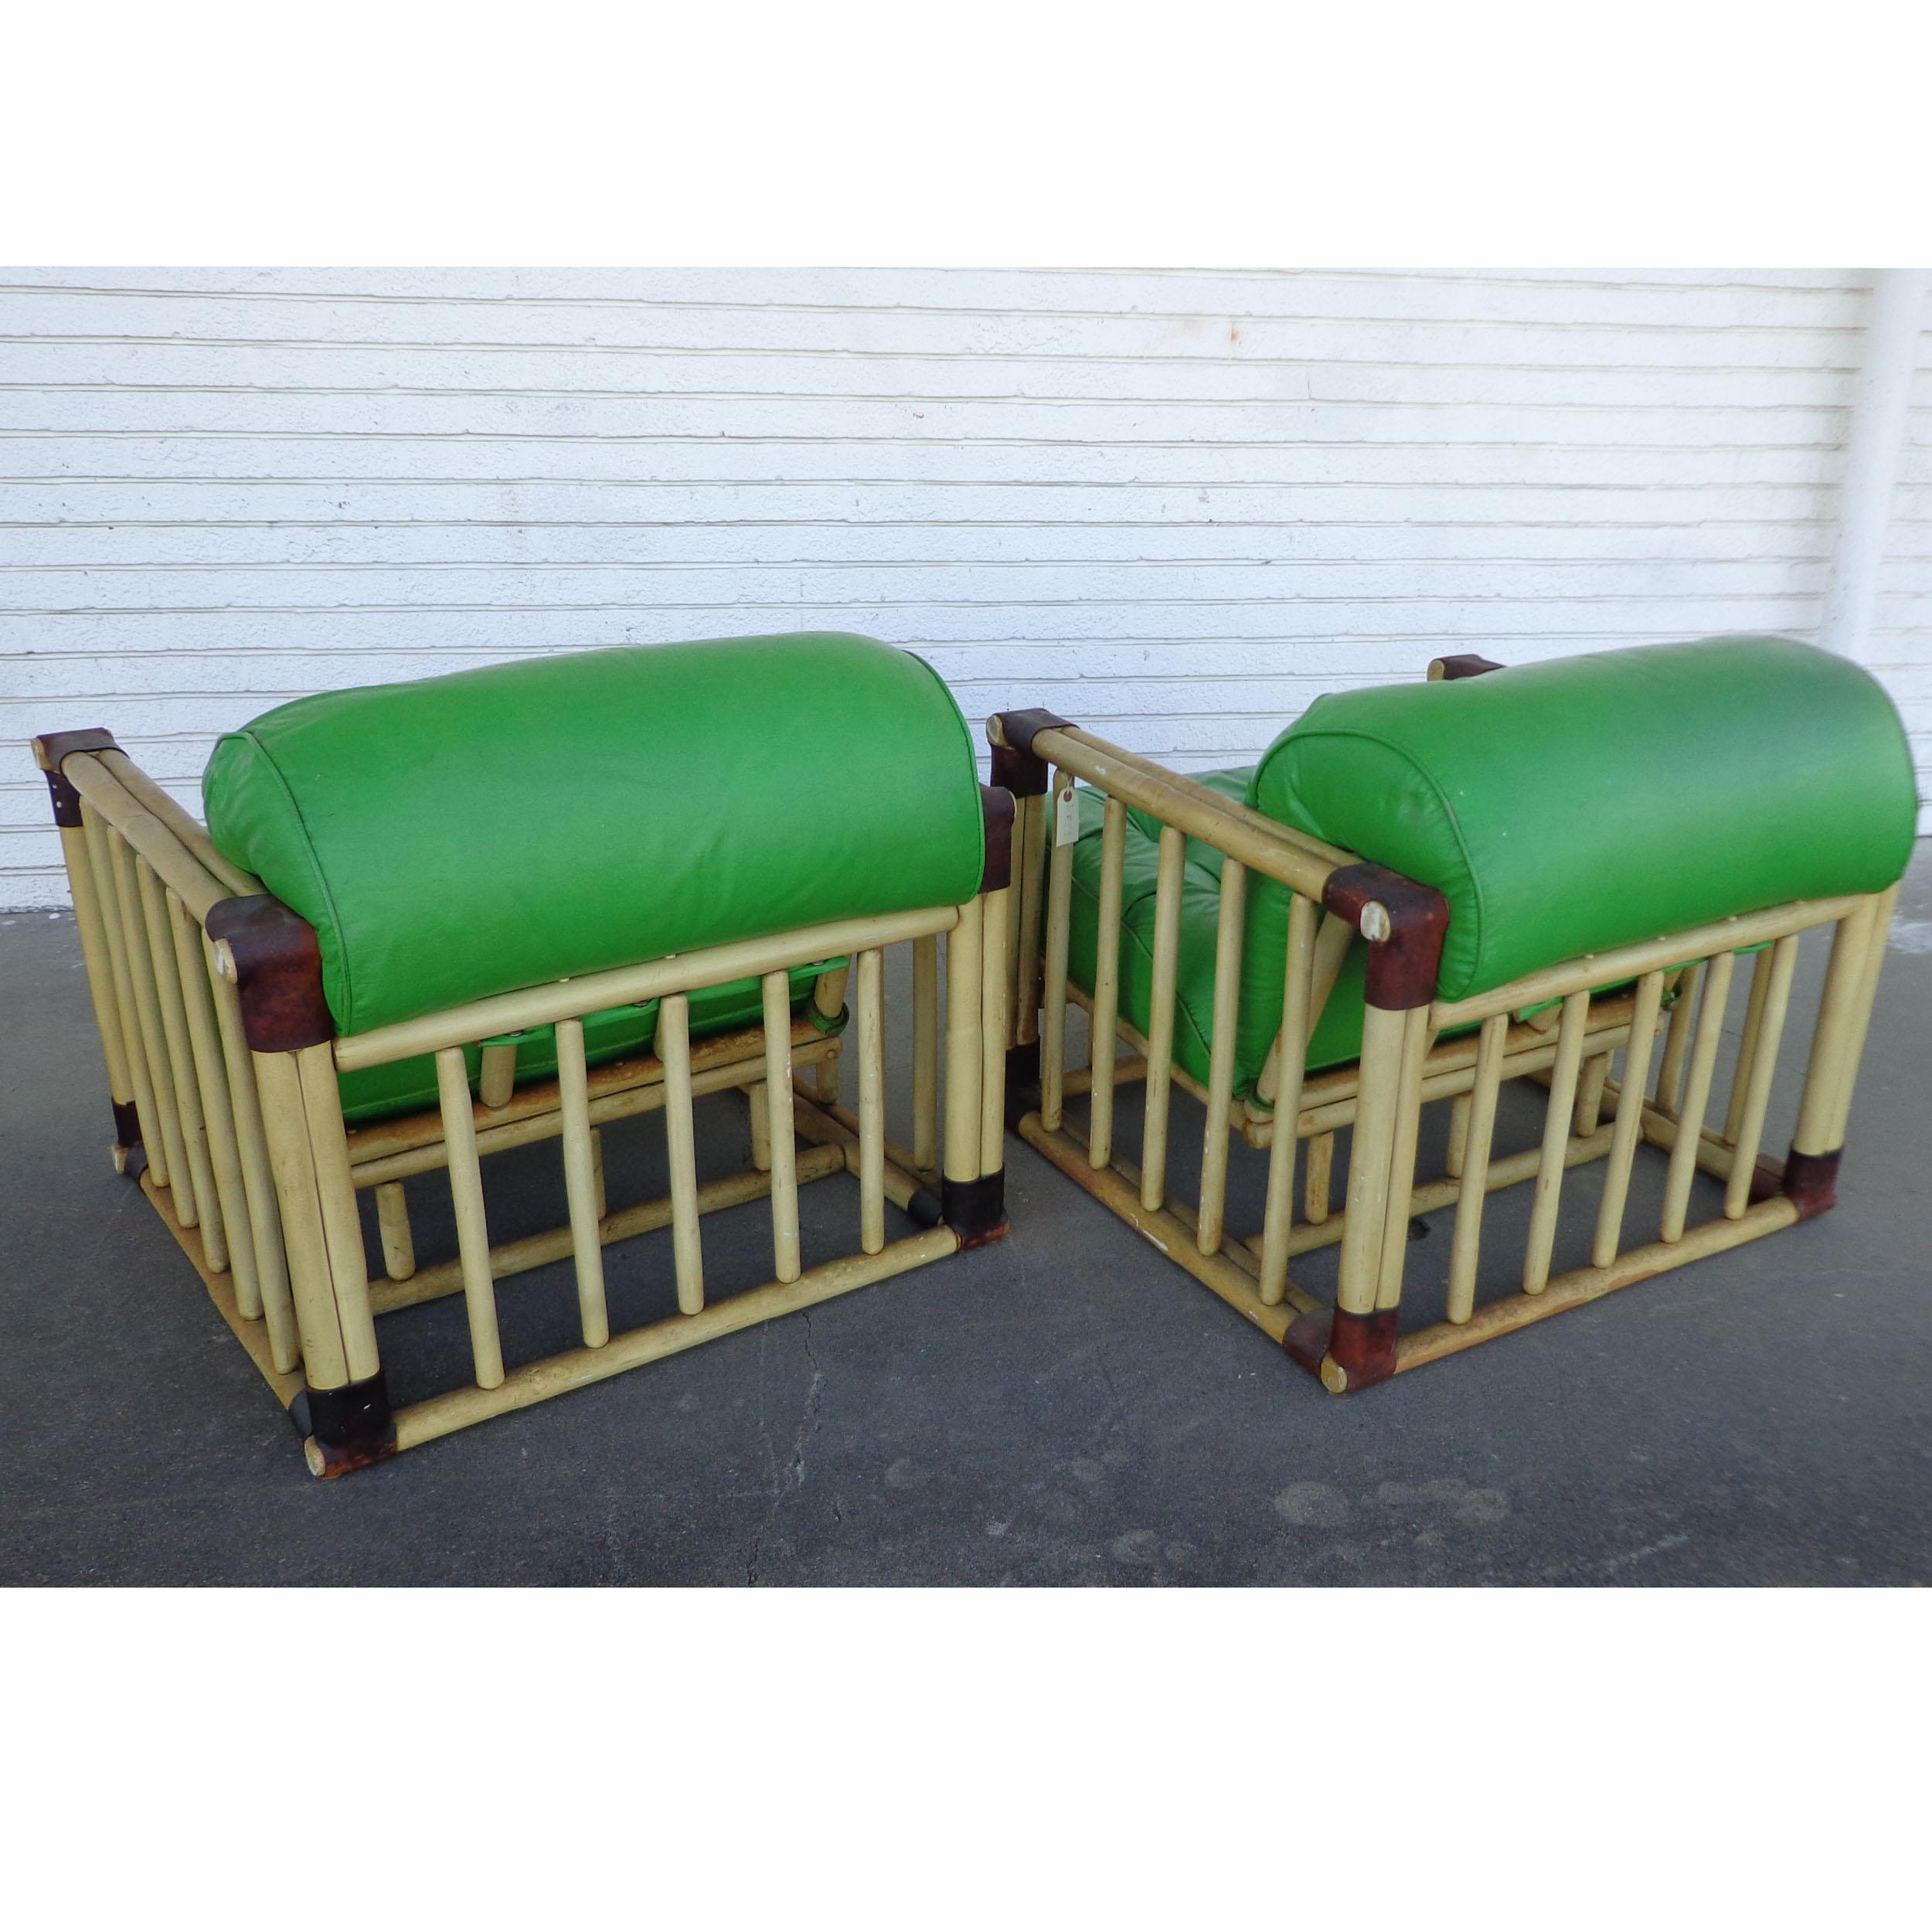 Pair of Original Bamboo Tufted Green Rattan Lounge Chairs by Ficks Reed, 1970's For Sale 3